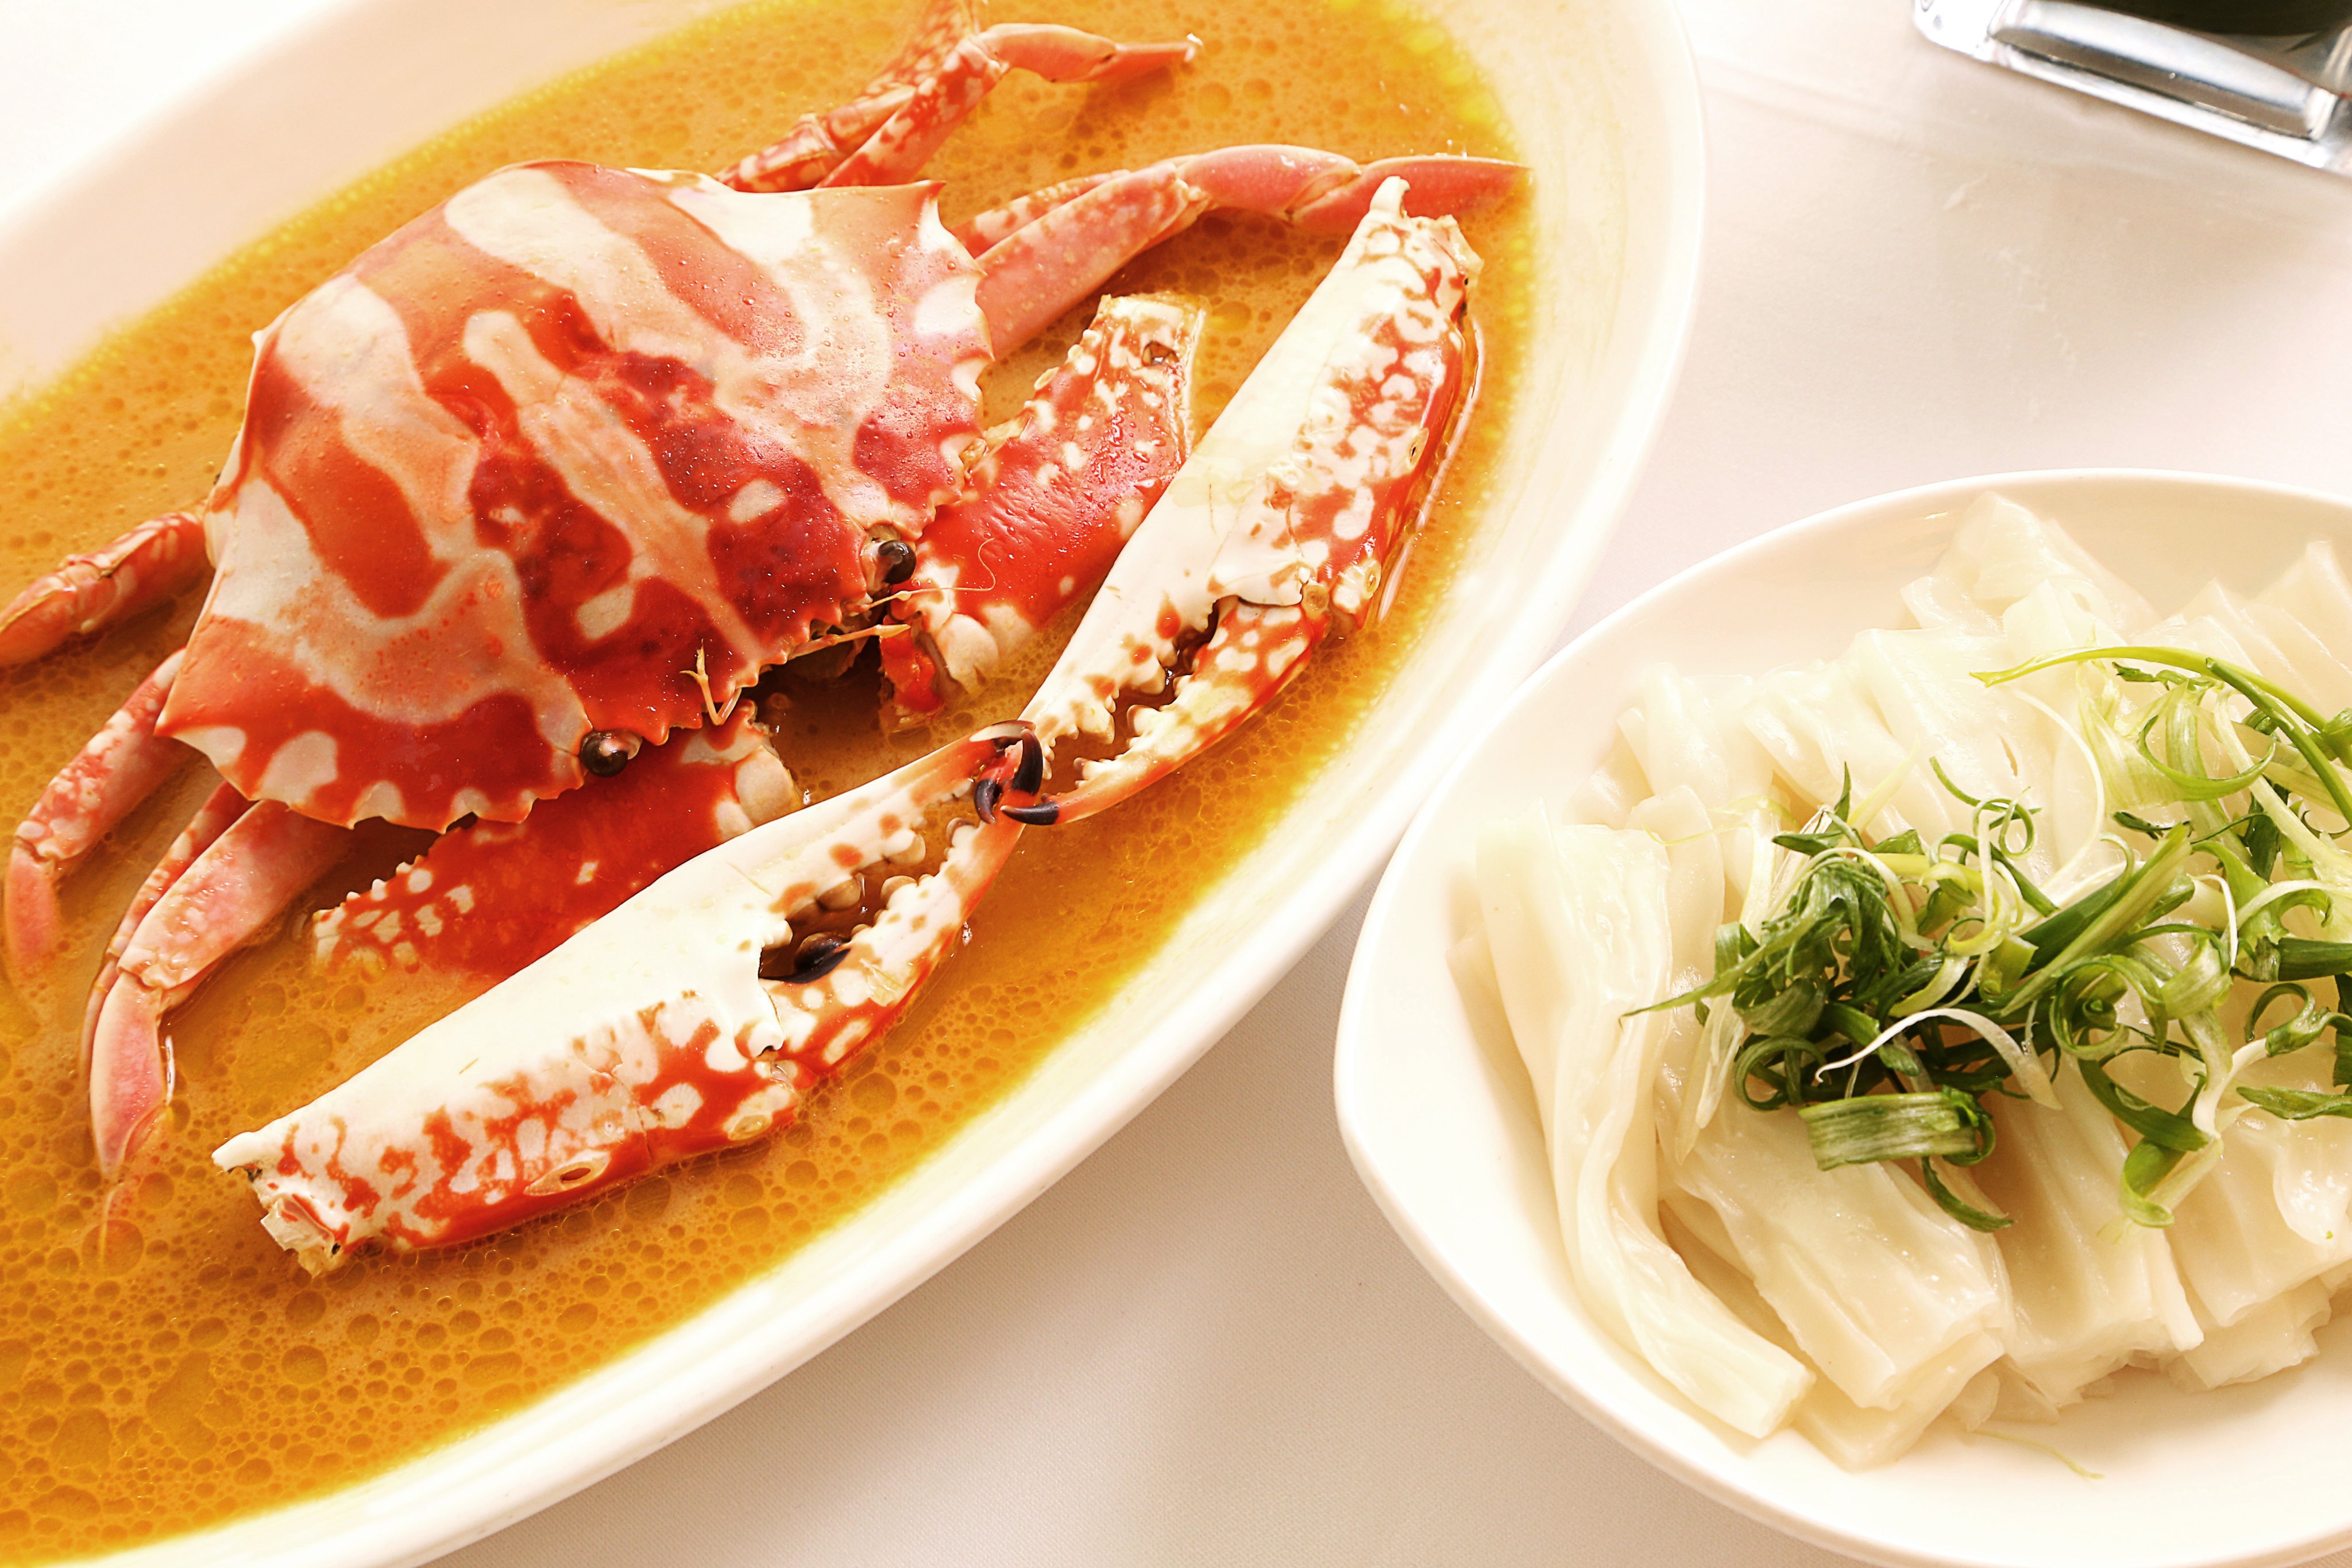 A crab dish from The Chairman. Photo: The Chairman